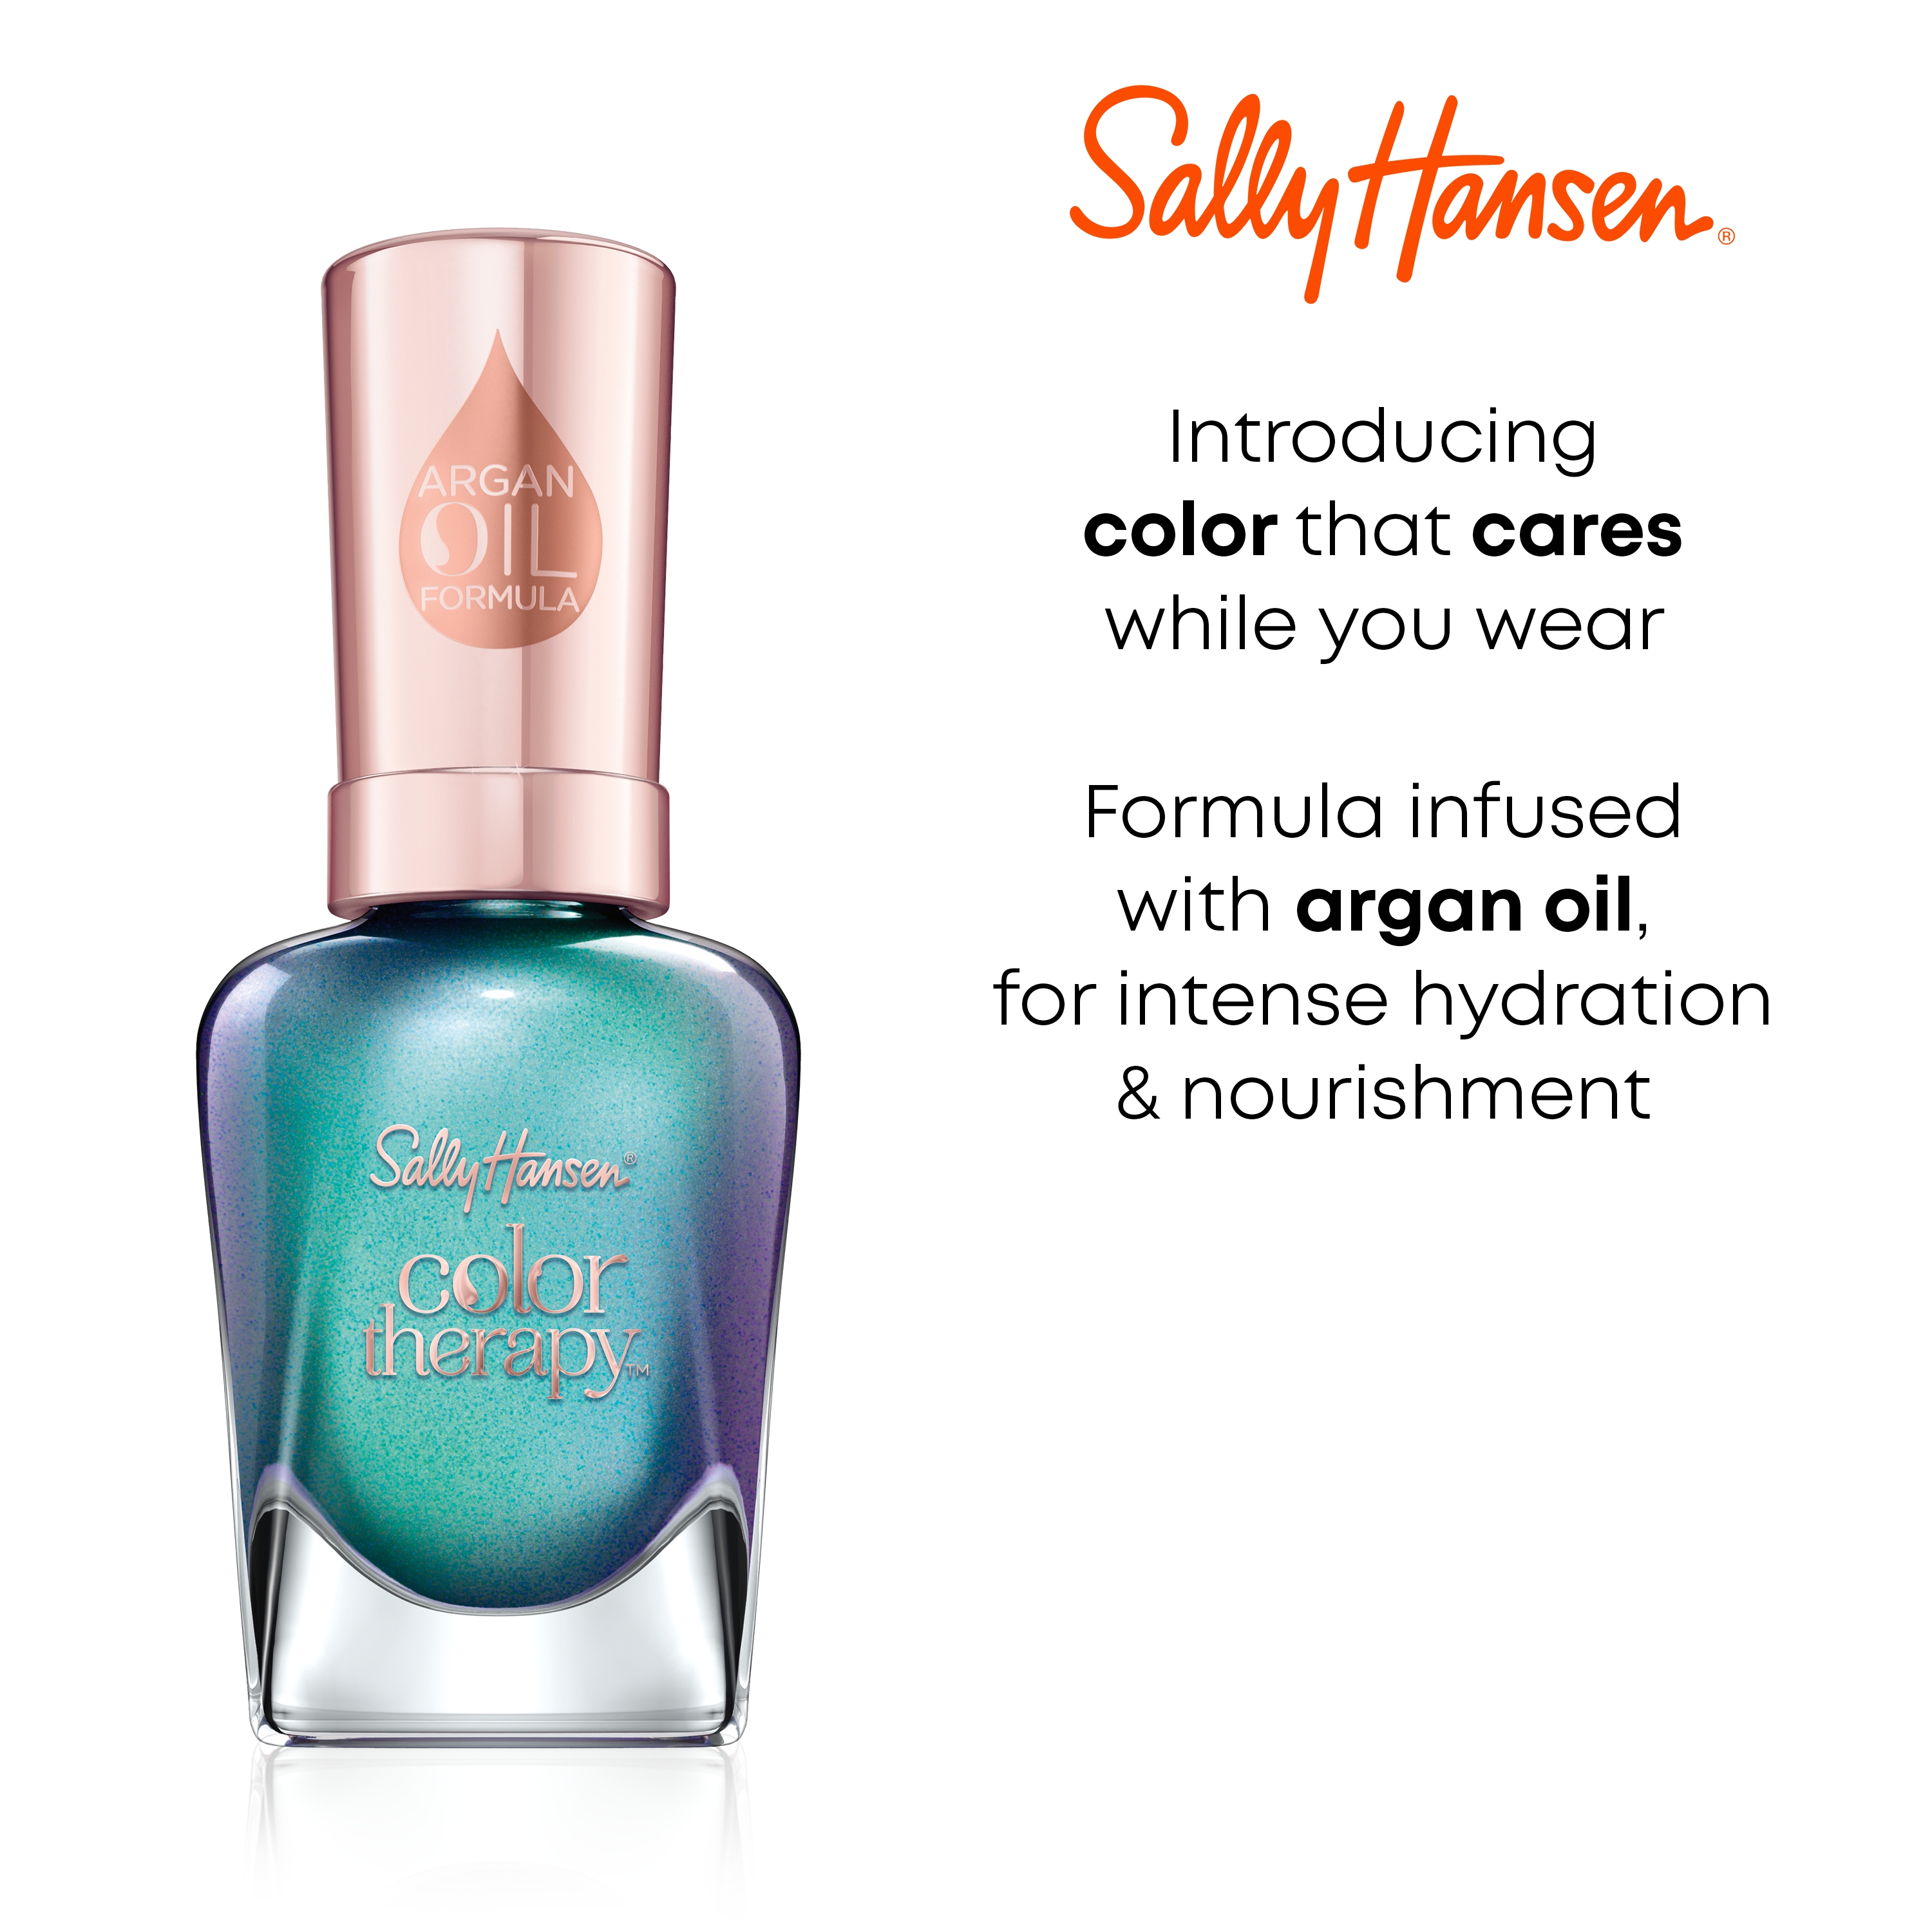 Sally Hansen Color Therapy Nail Color, Oceans Away, 0.5 oz, Color Nail Polish, Nail Polish, Nail Polish Colors, Restorative, Argan Oil Formula, Instantly Moisturizes - image 2 of 13